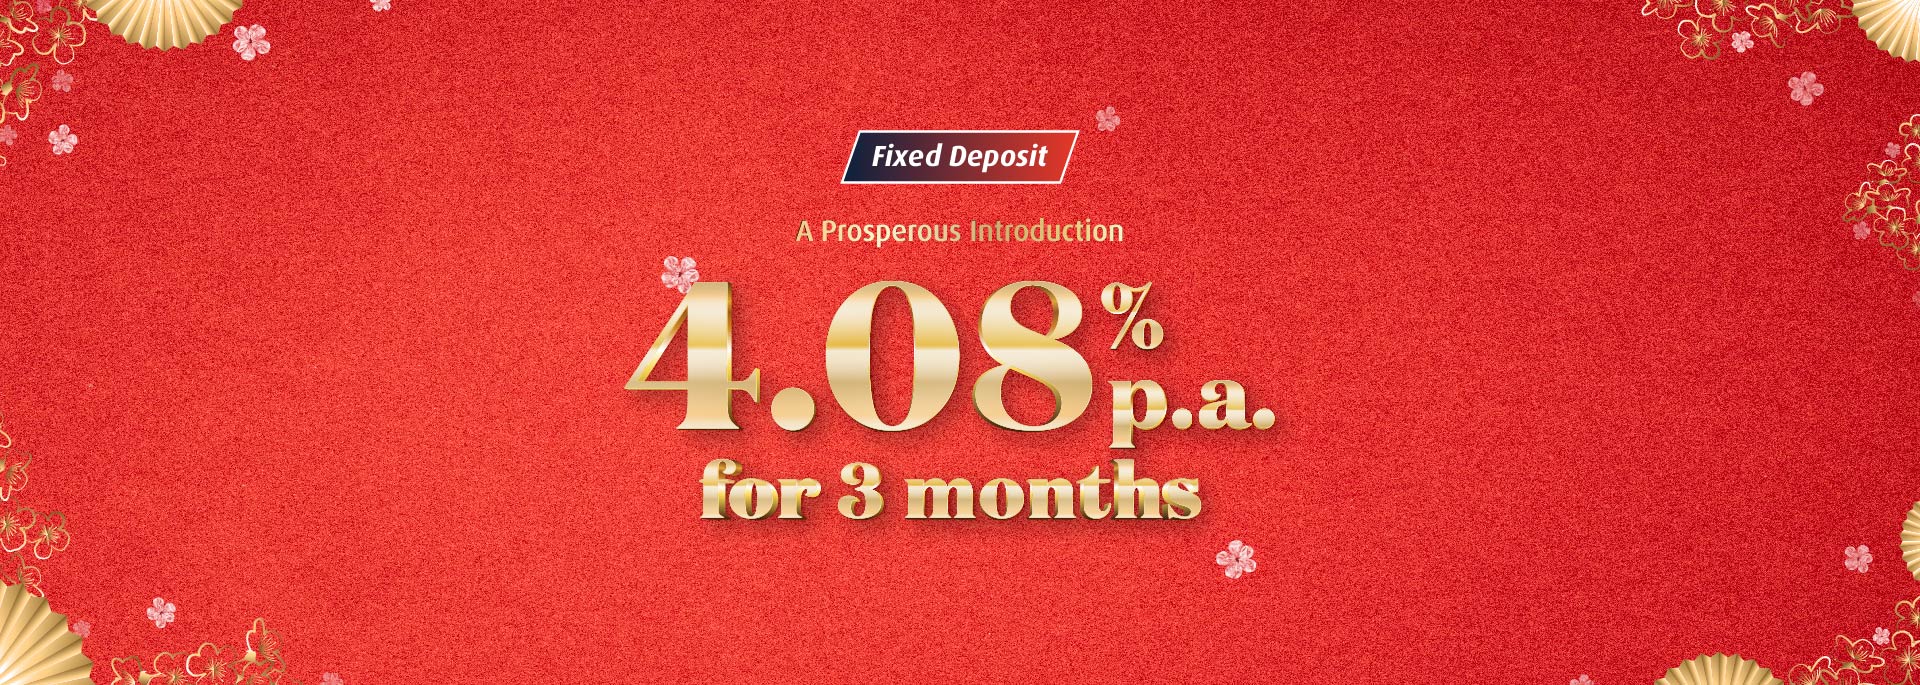 Celebrate new possibilities with a prisperous Fixed Deposit rate!